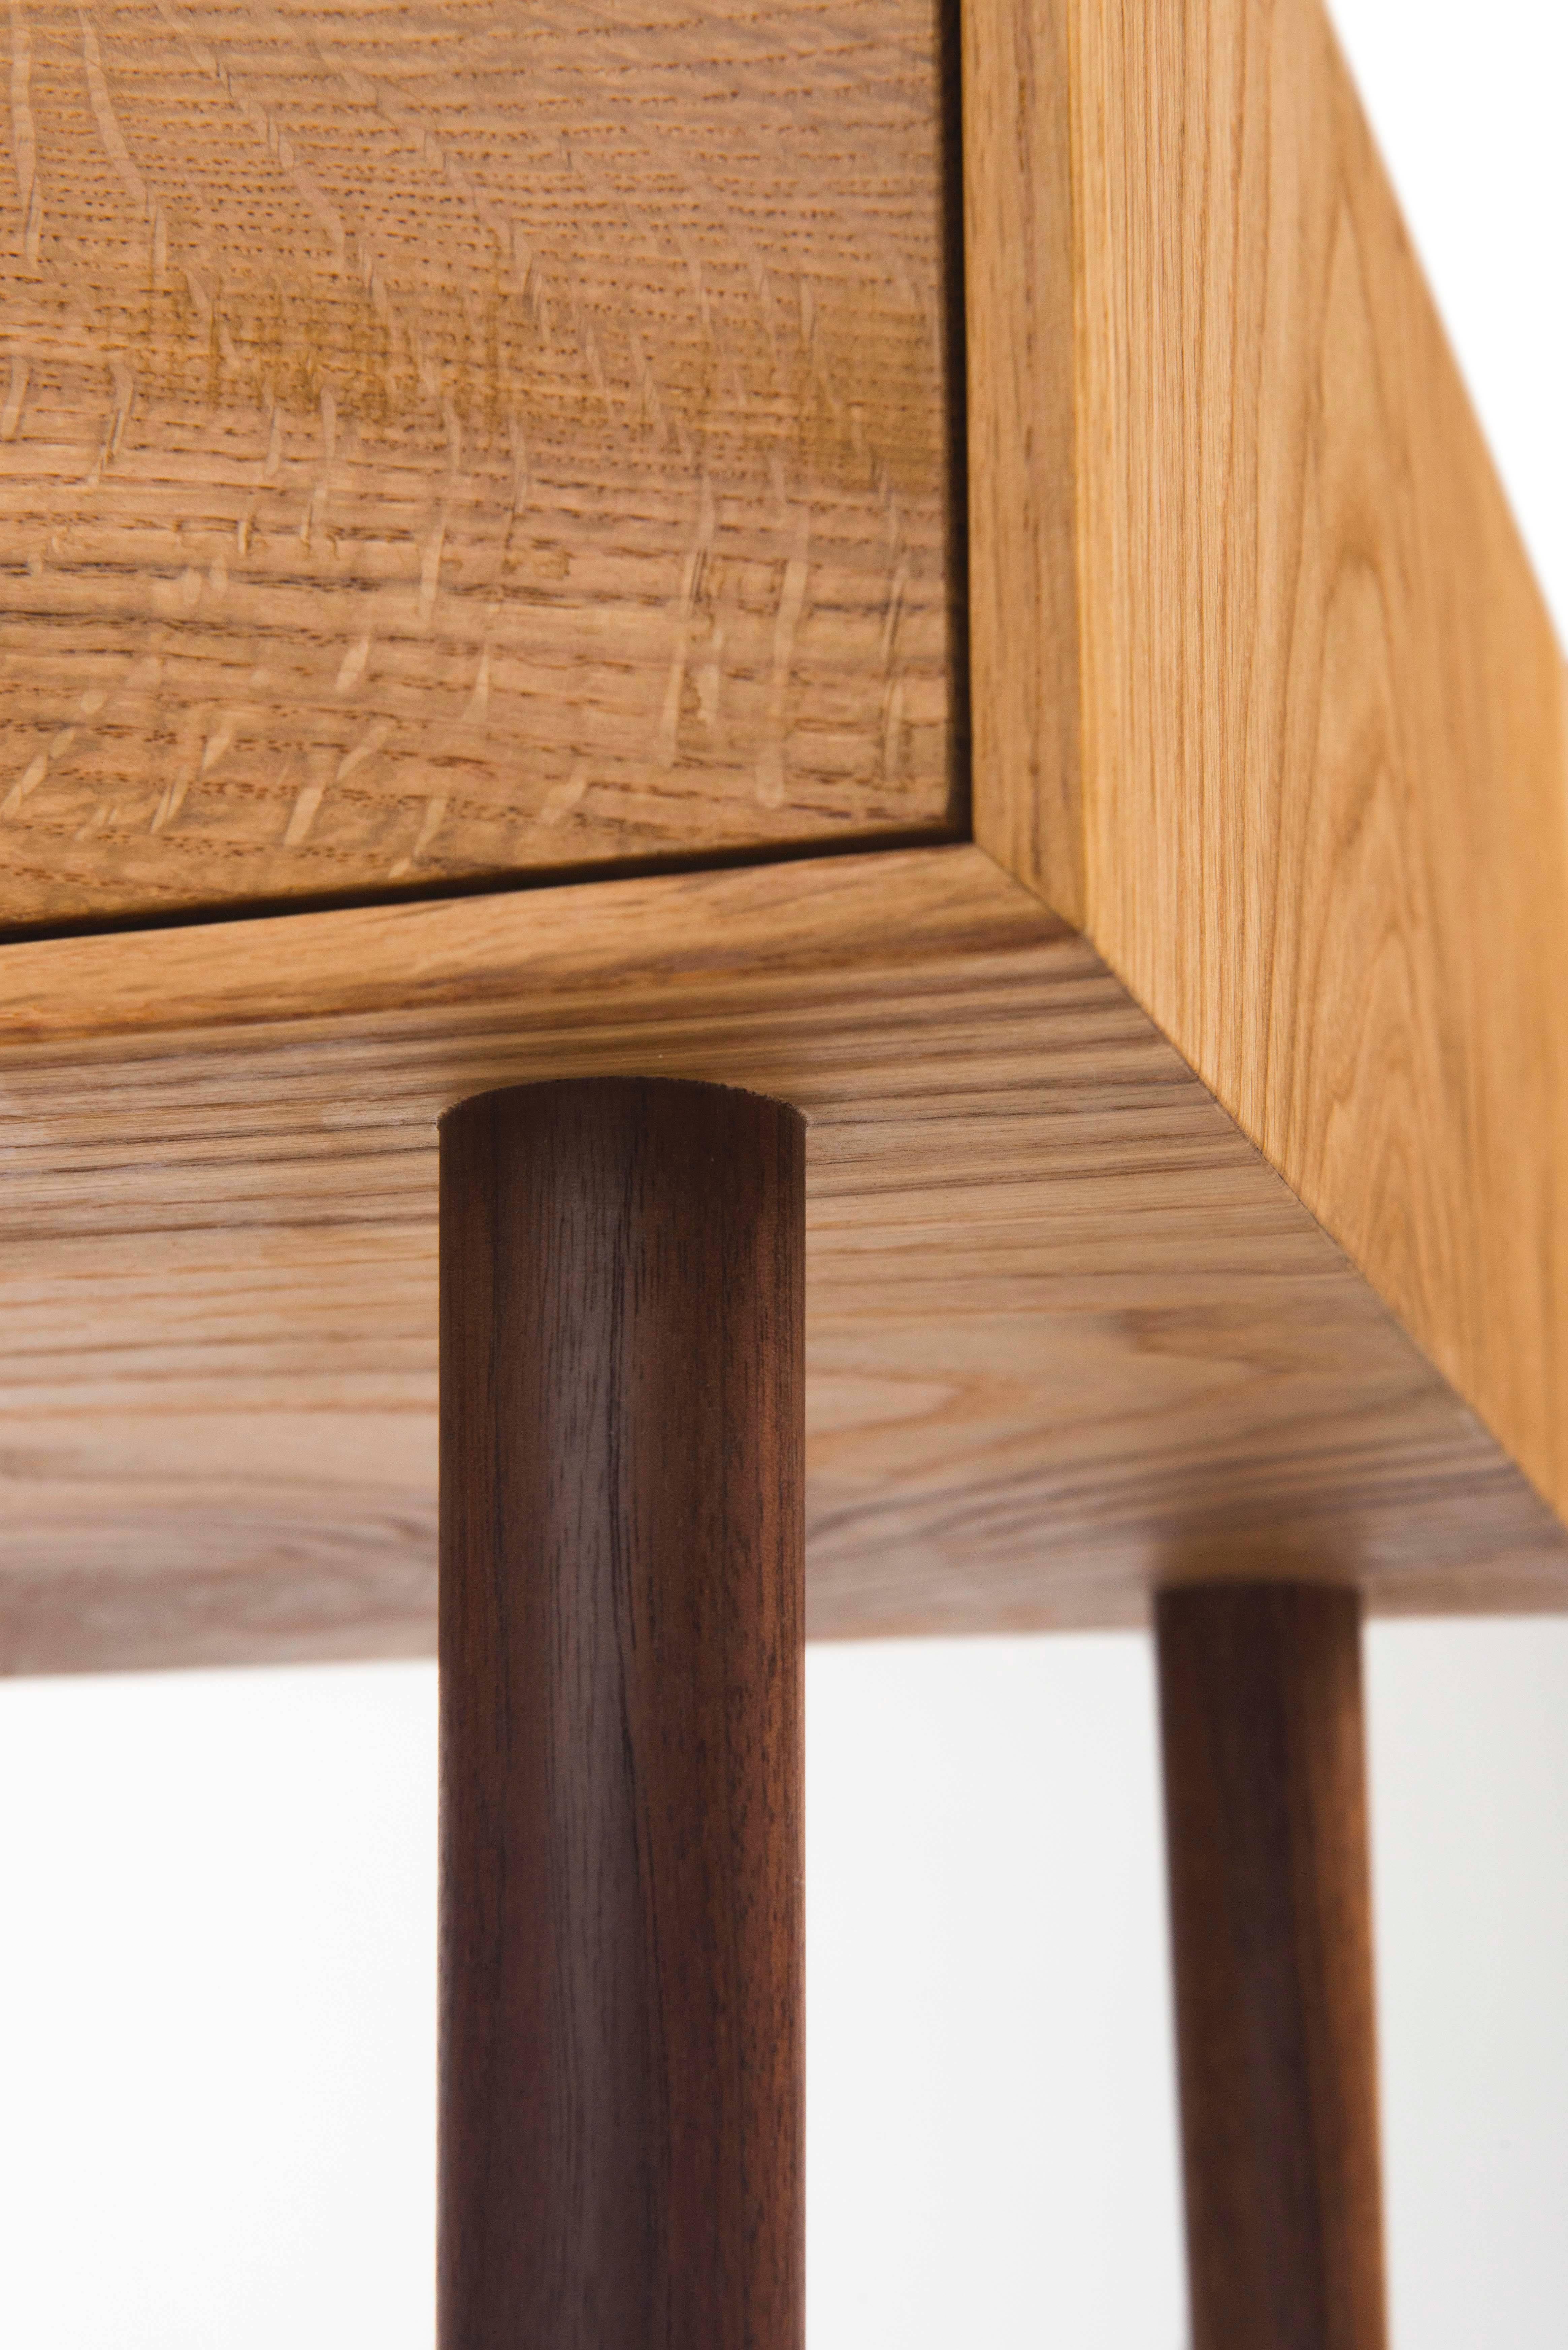 Contemporary End Table in Chestnut Oak and Hand-Turned Walnut with a Single Drawer